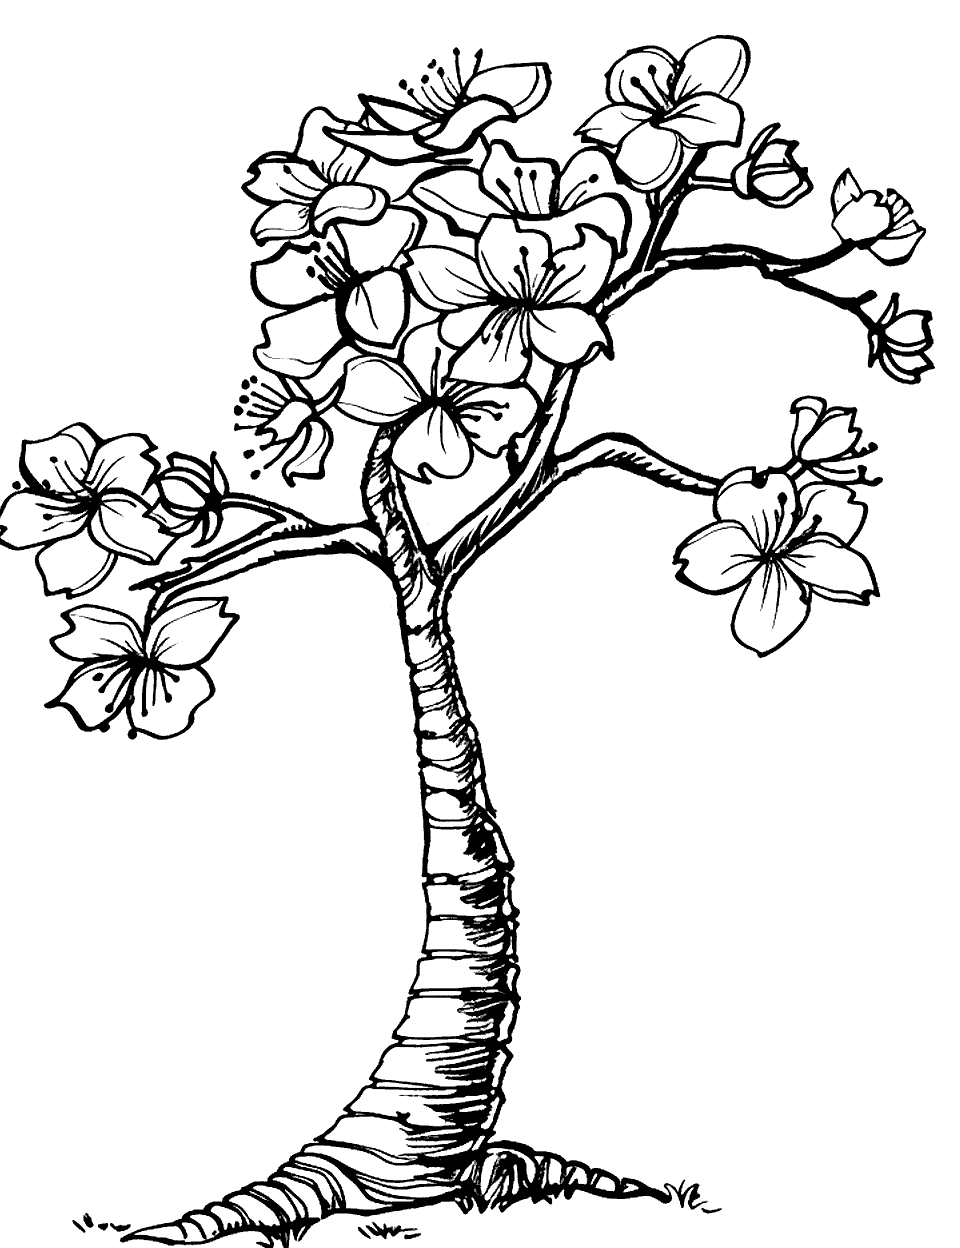 Easy Cherry Blossom Tree Coloring Page - A cherry blossom tree with flowers.